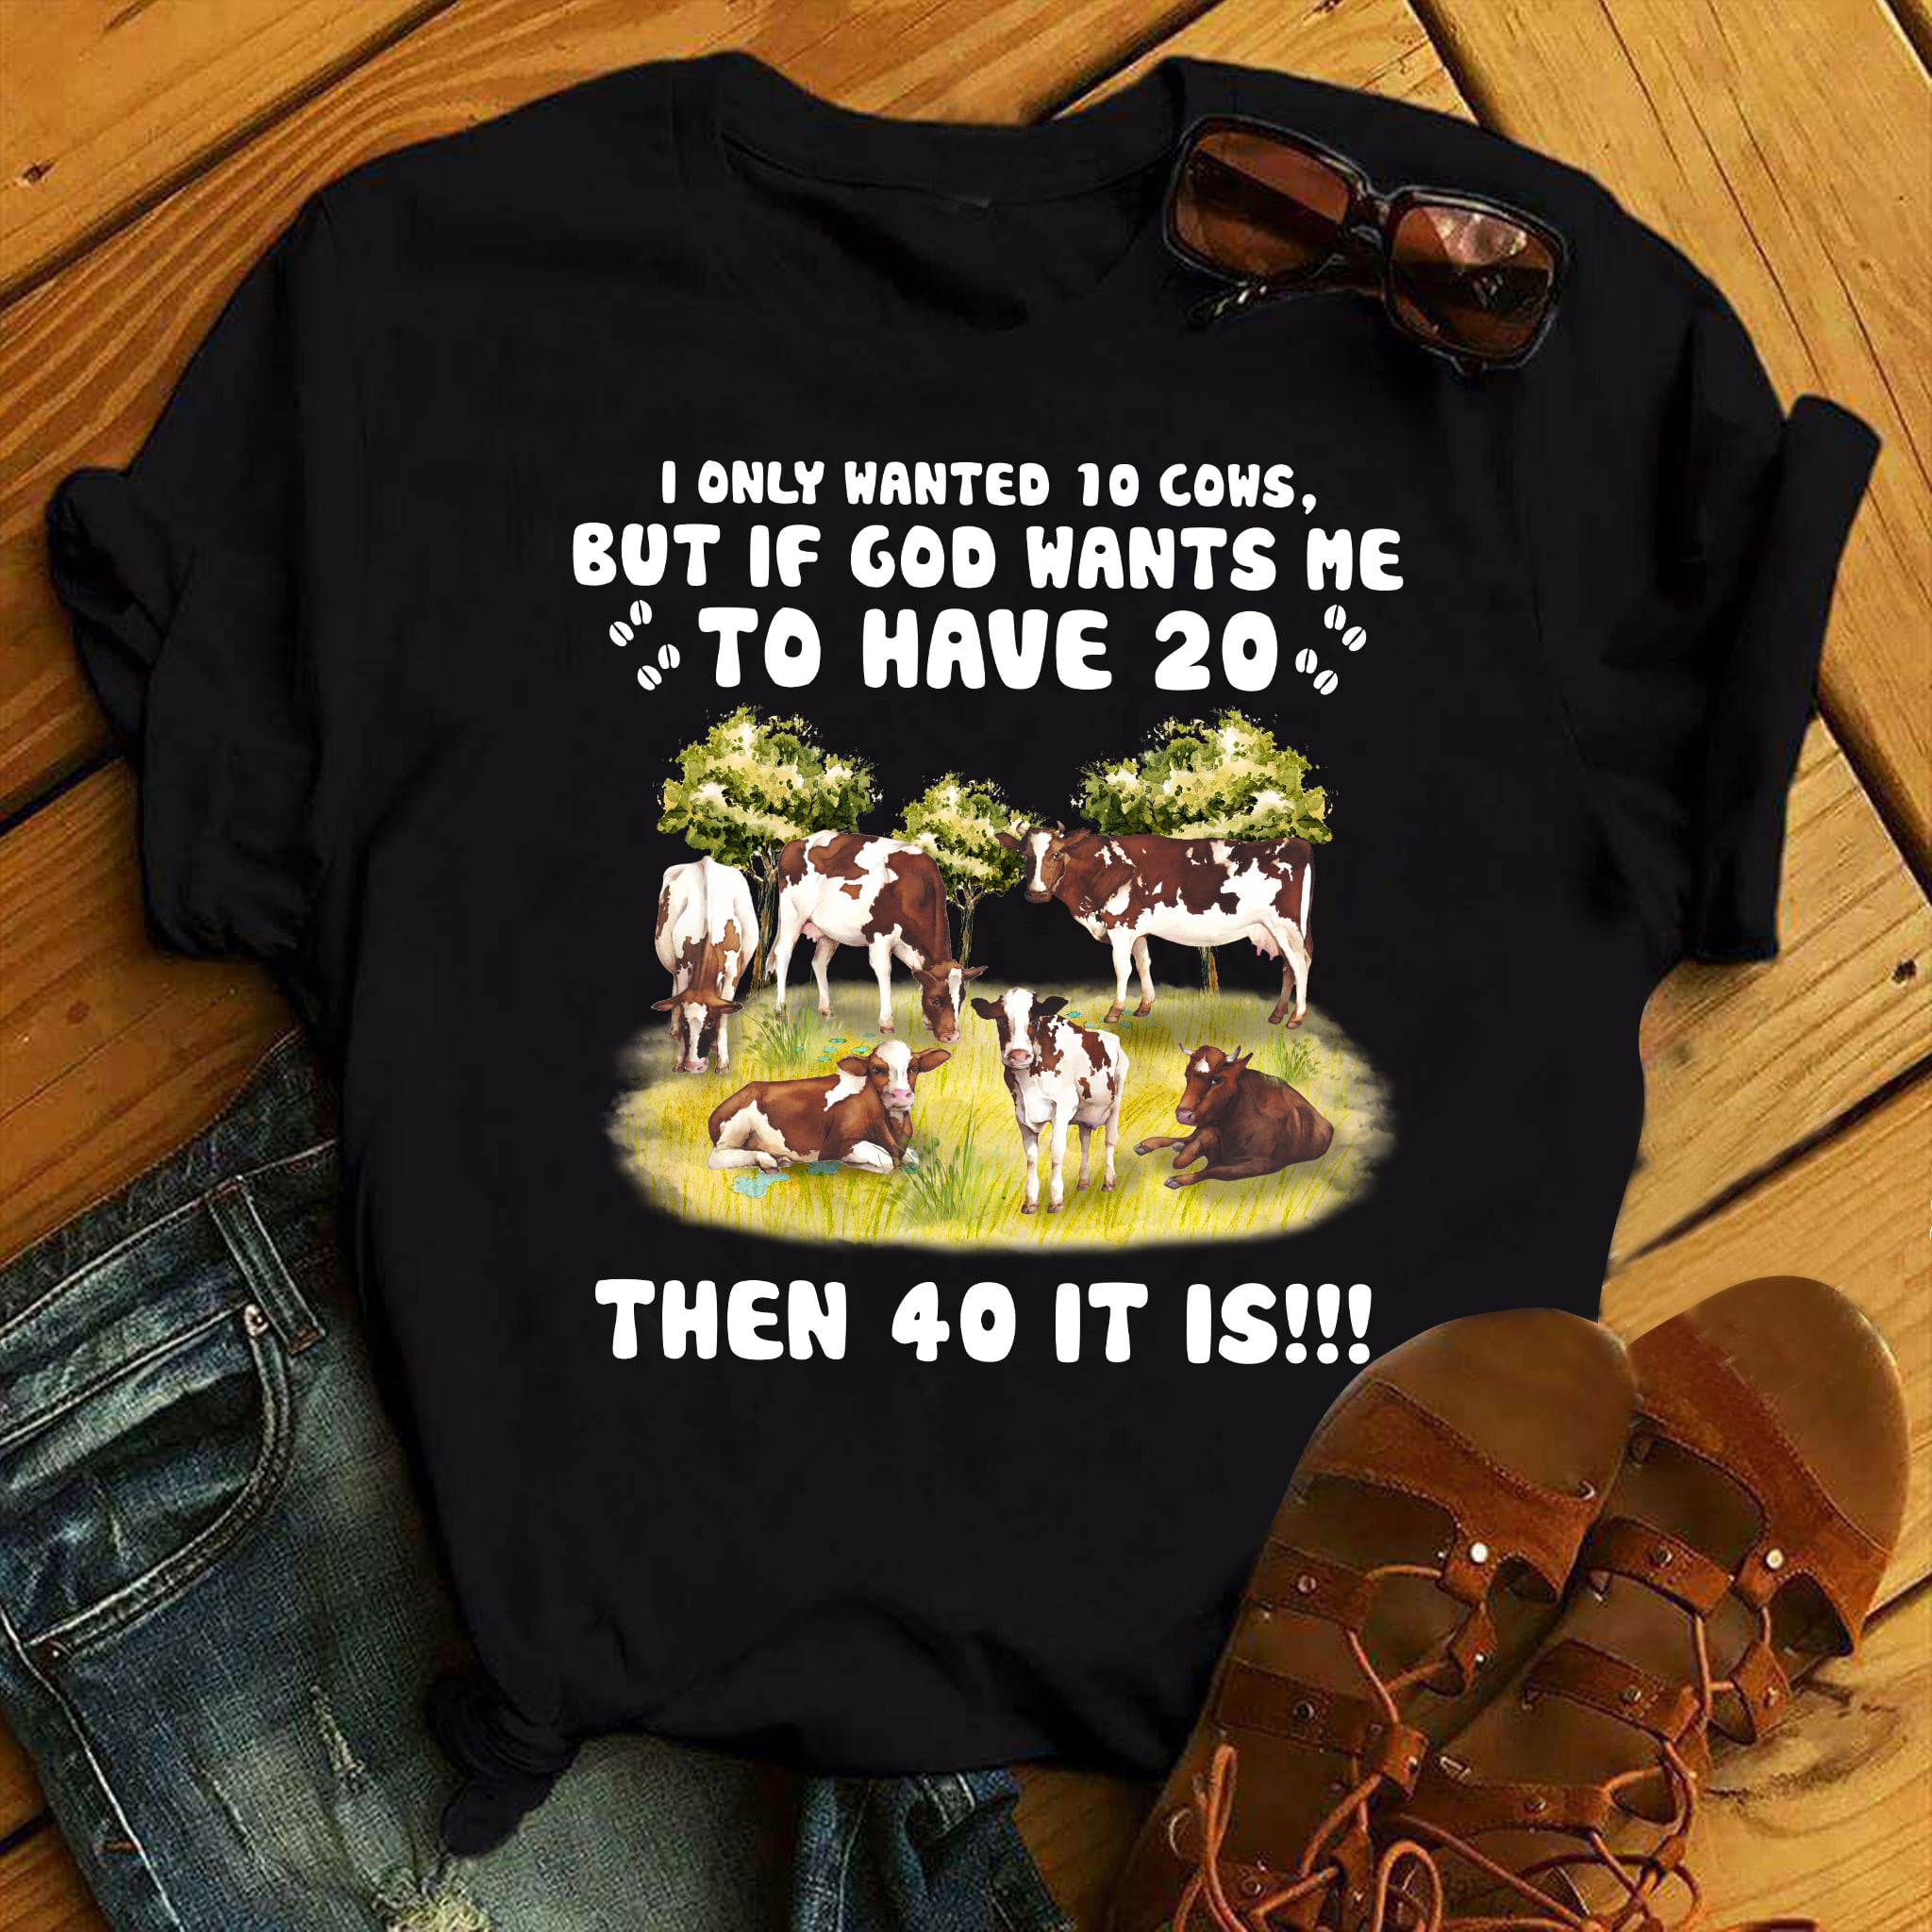 Love Cow - I only wanted 10 cows but if god want me to have 20 then 40 it is